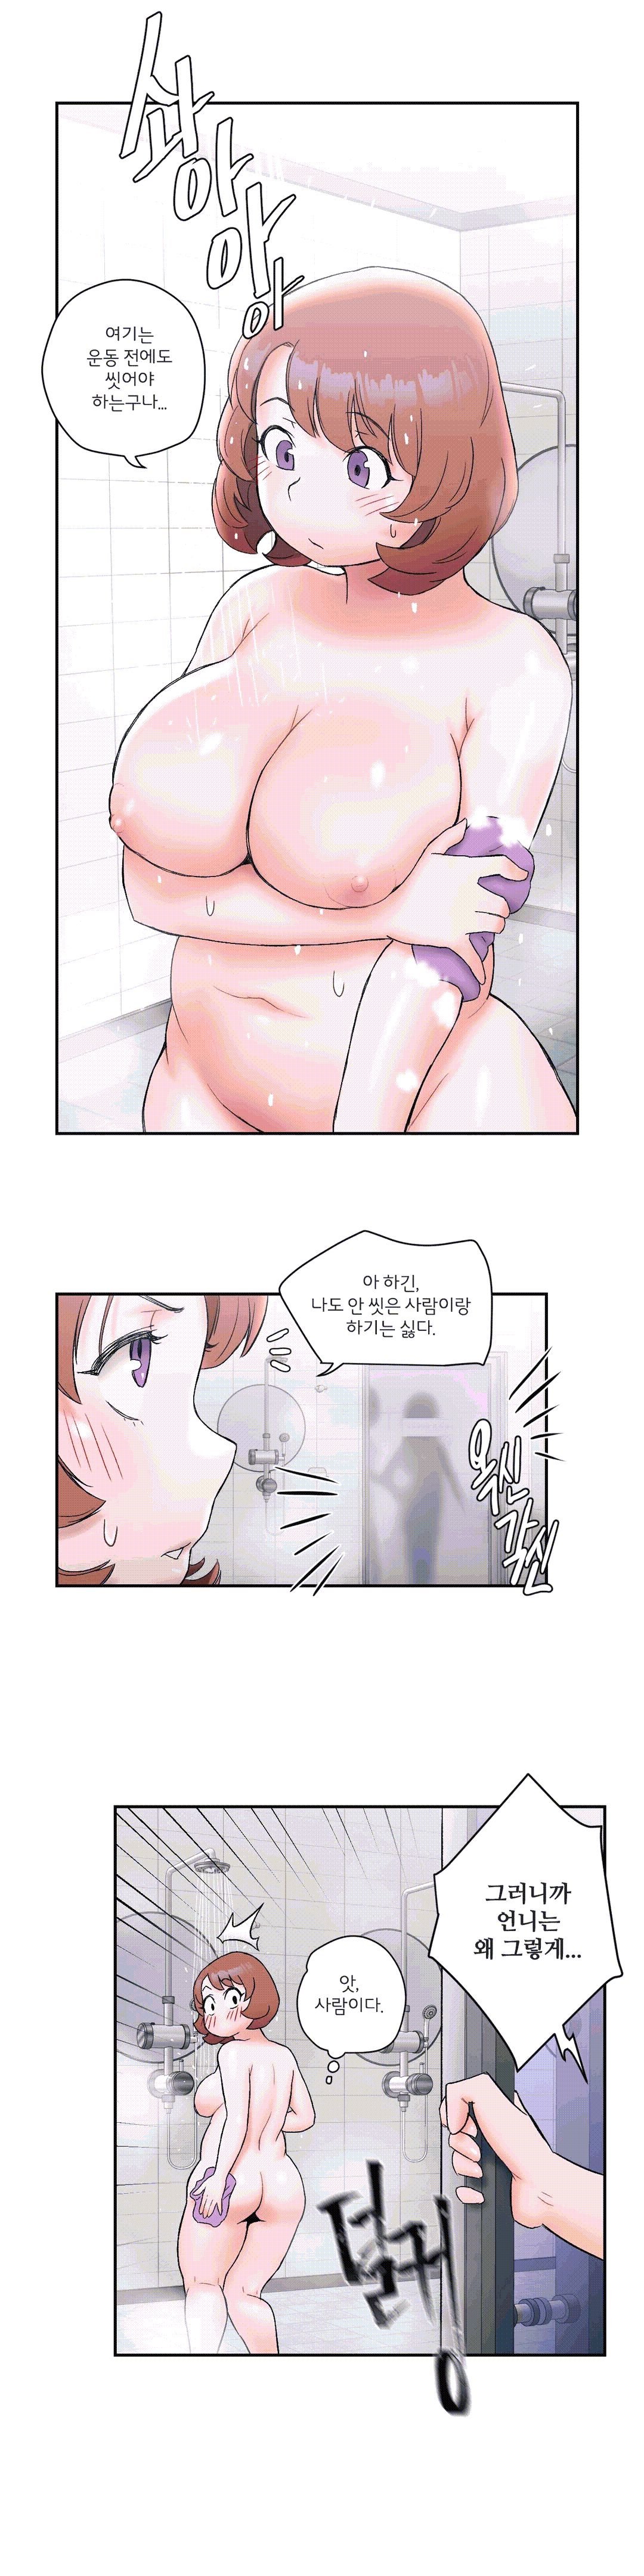 Sexercise Raw - Chapter 9 Page 20